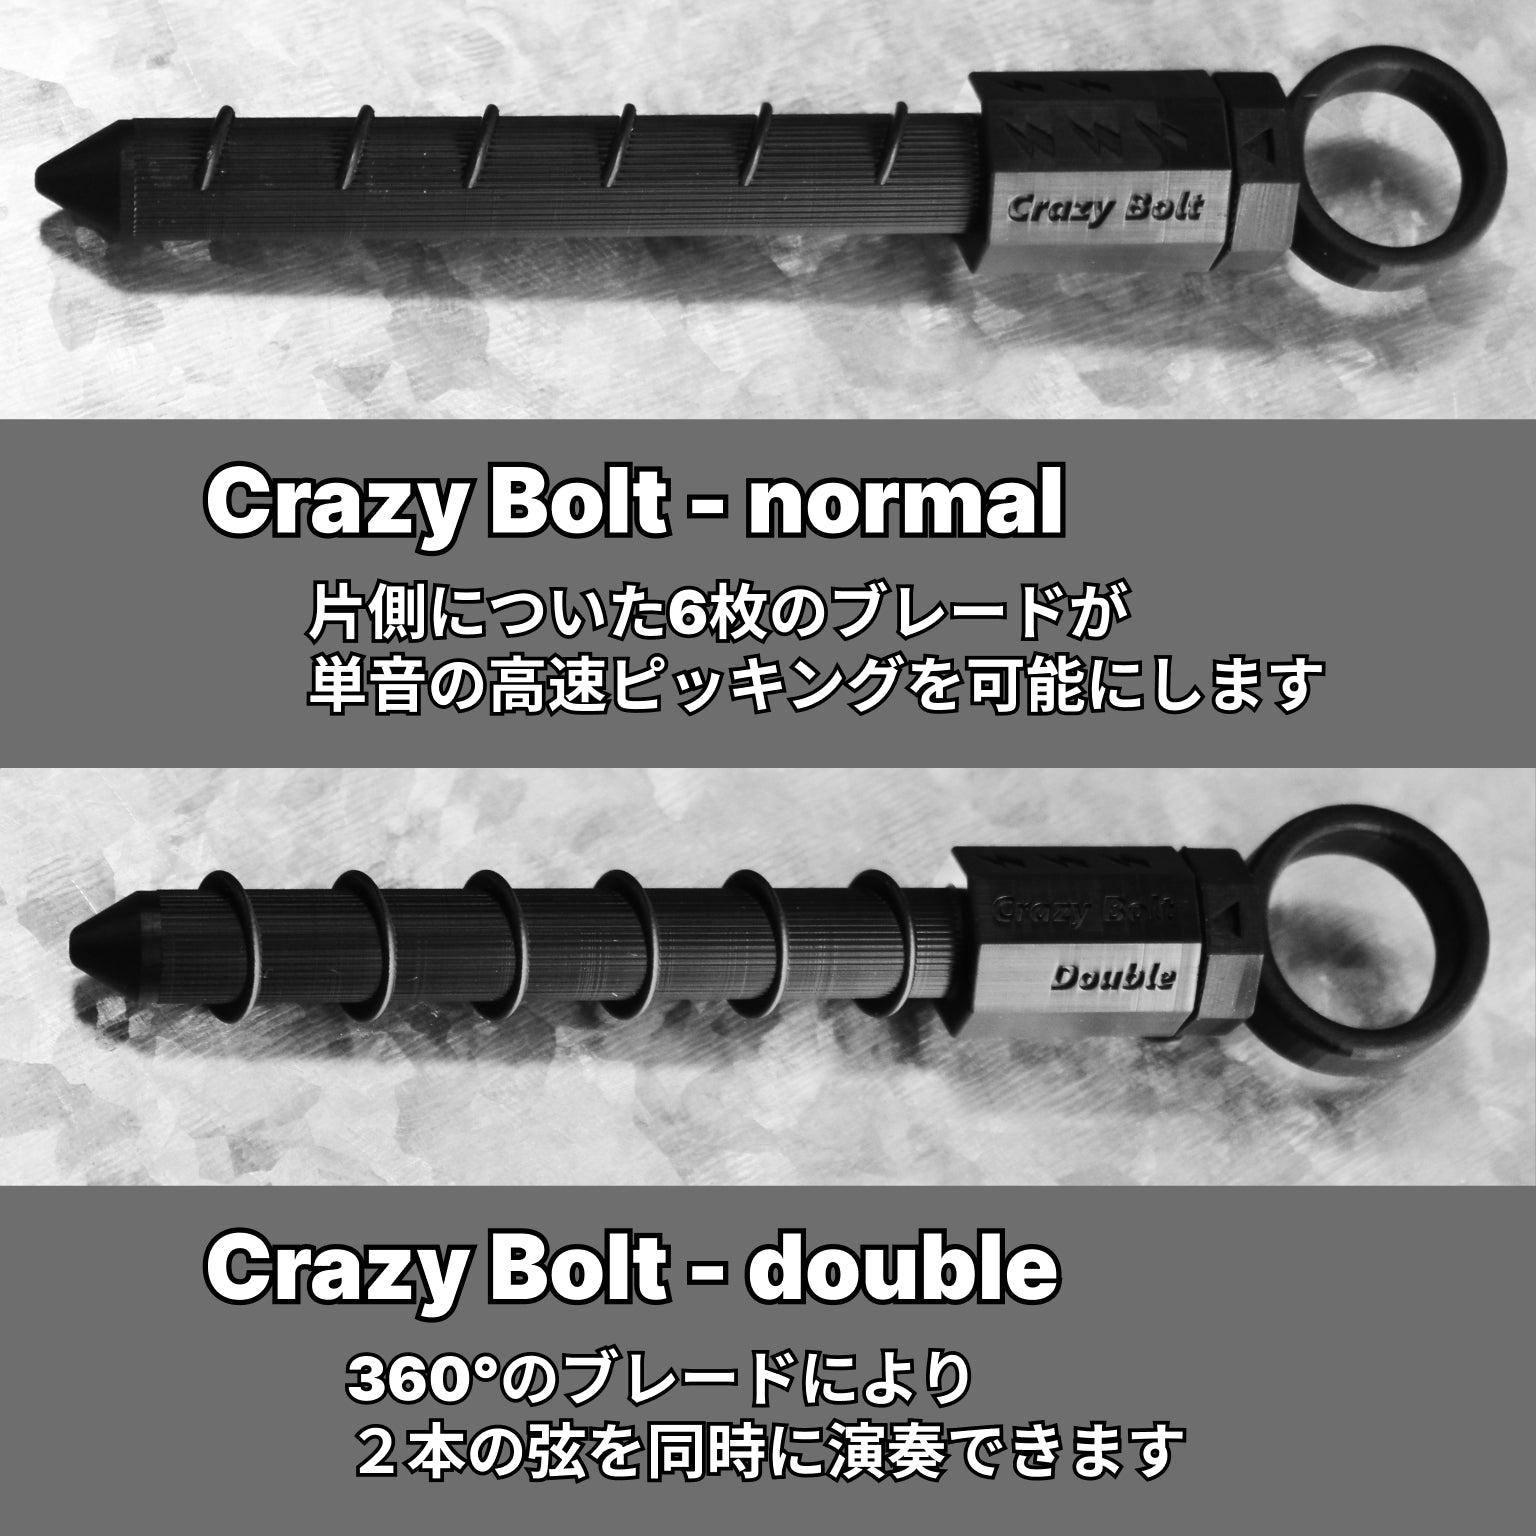 Crazy Bolt A completely different acoustic guitar performance tool